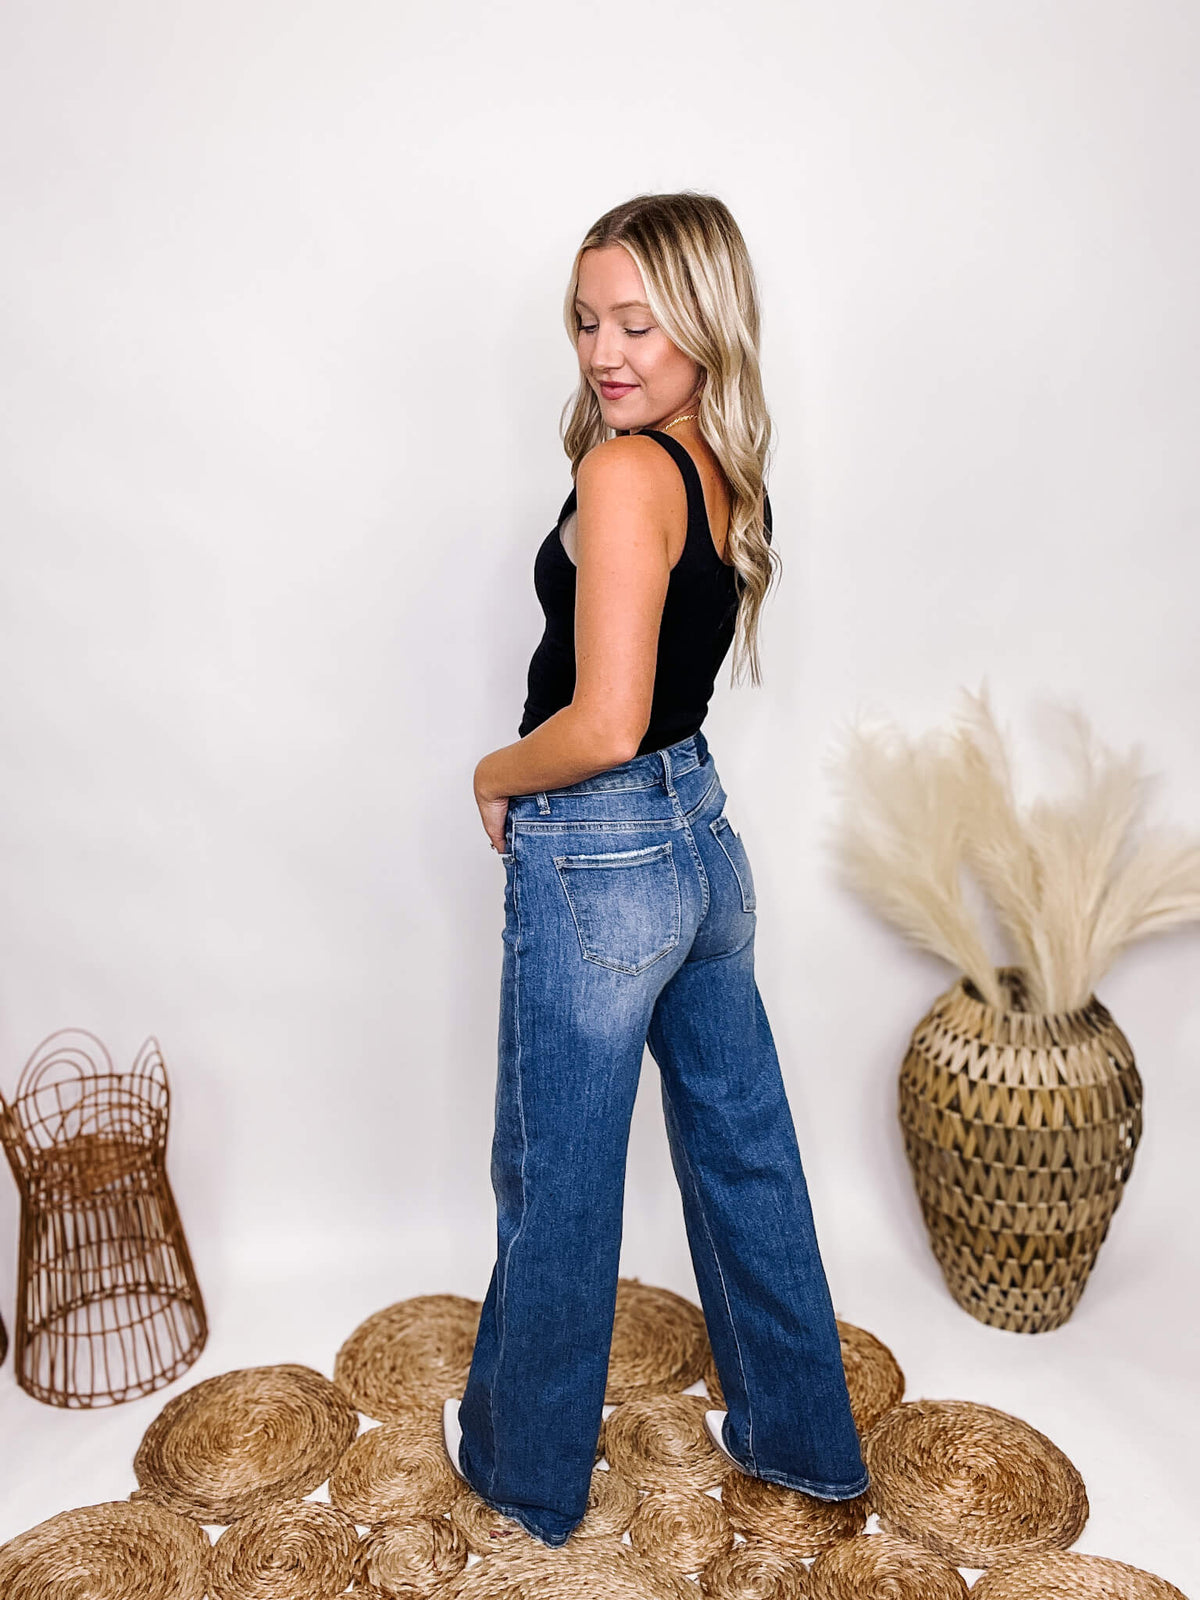 Mid Rise Crossover Stretchy Wide Leg Risen Jeans